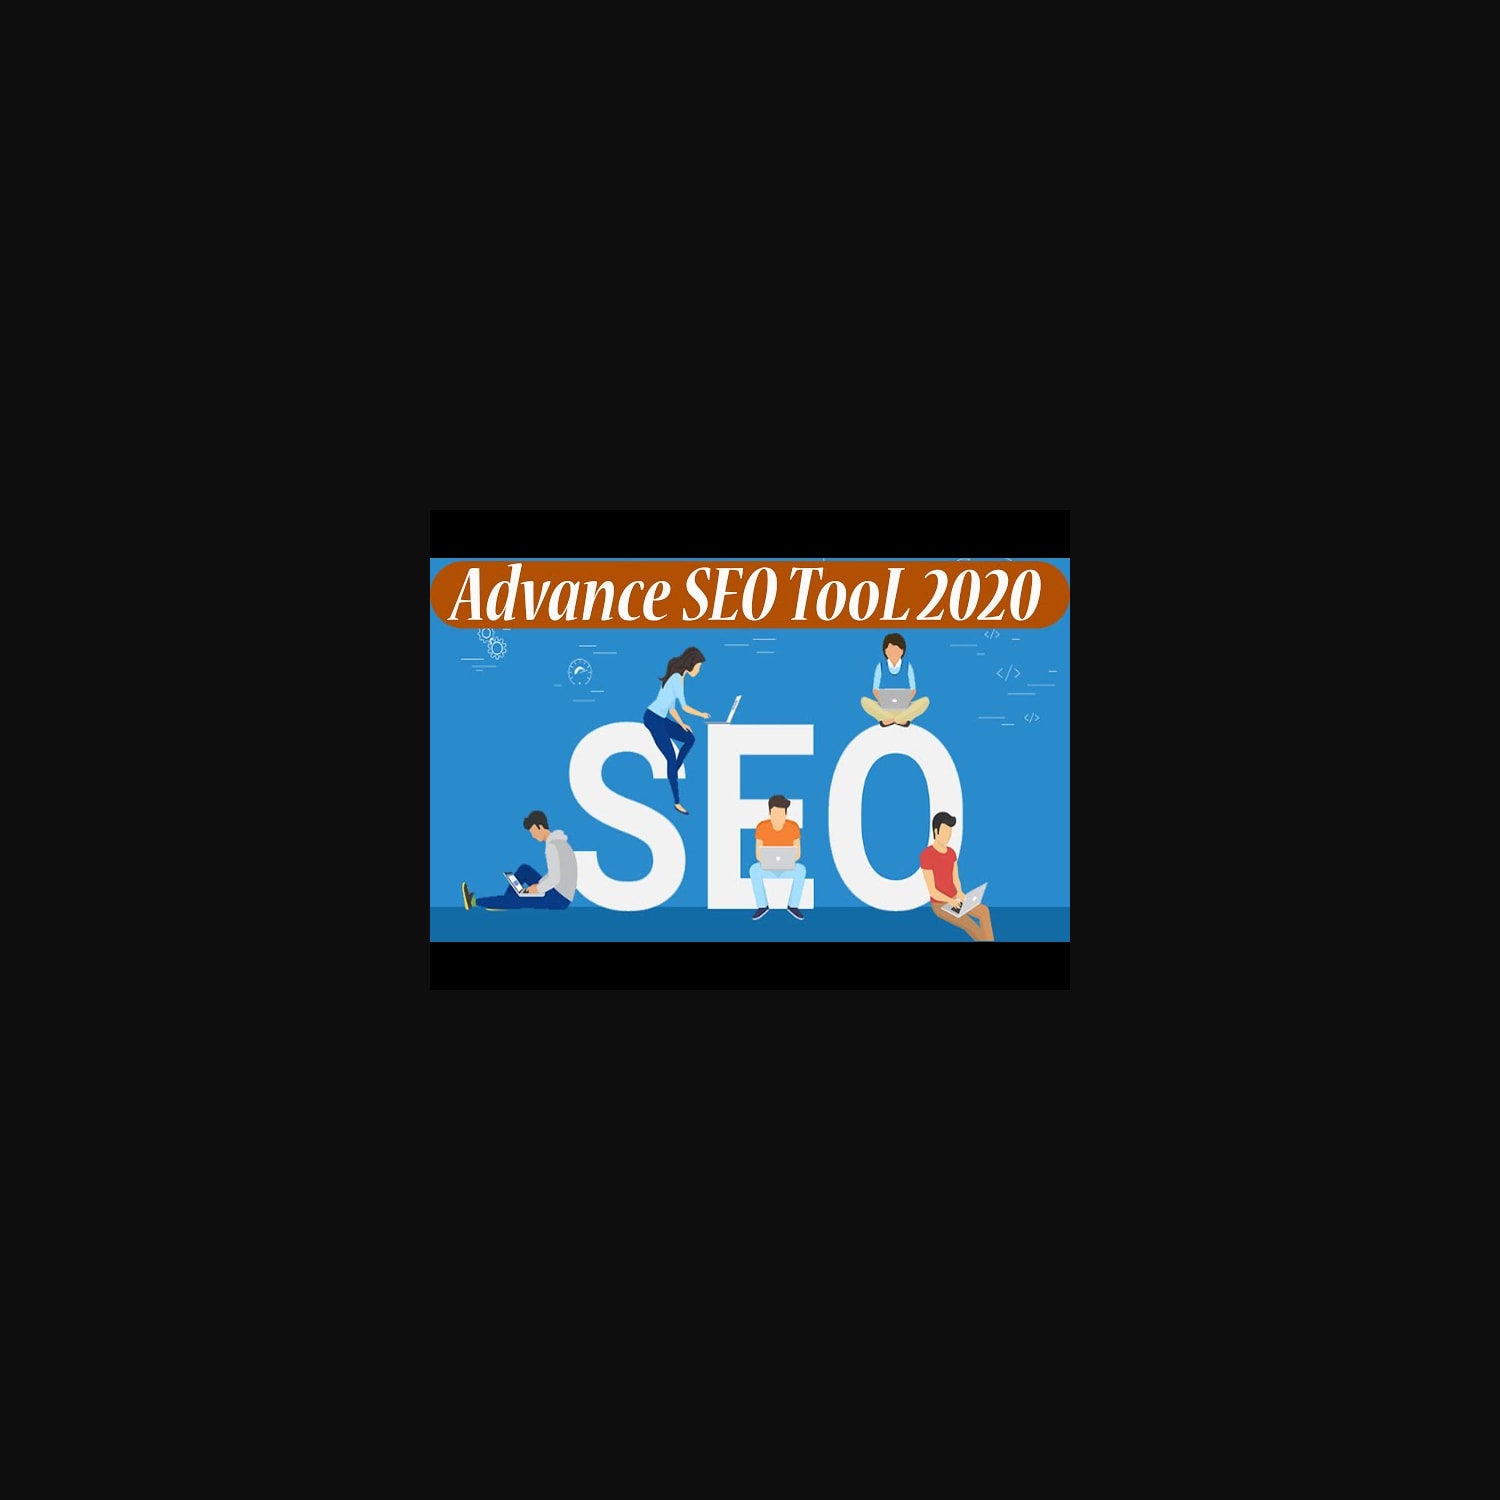 Advance SEO tools 2020, how to get #1 rank on search engine #18digitaltech, improve search rankings